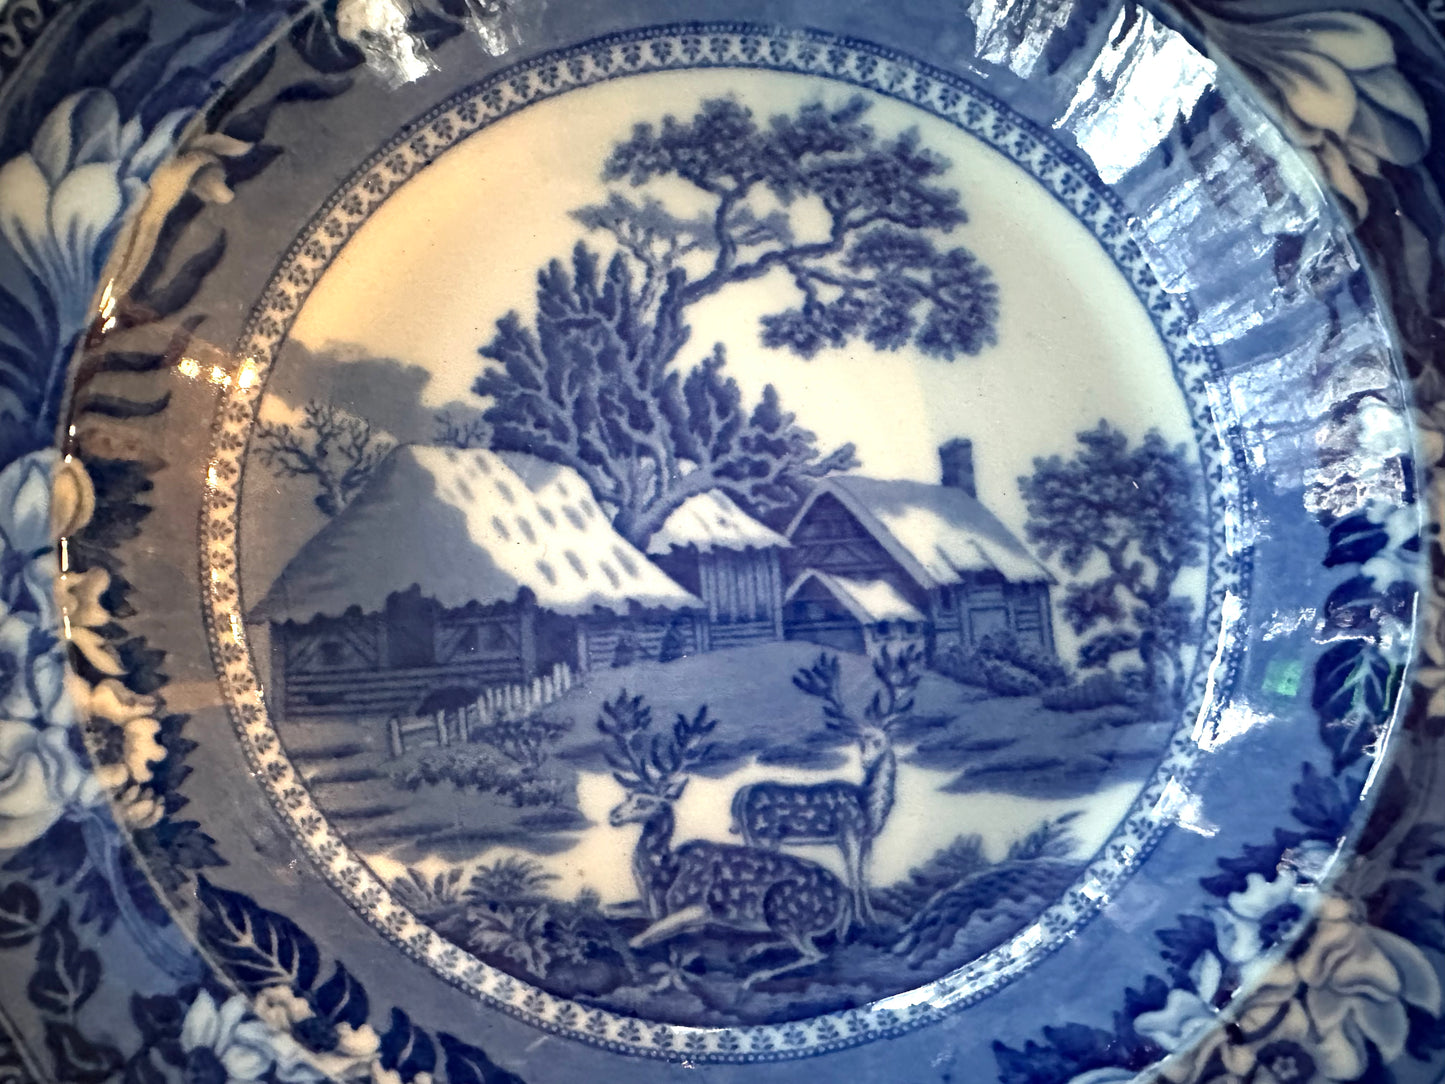 Antique English Fallow Deer soup plates by Wedgwood - DharBazaar